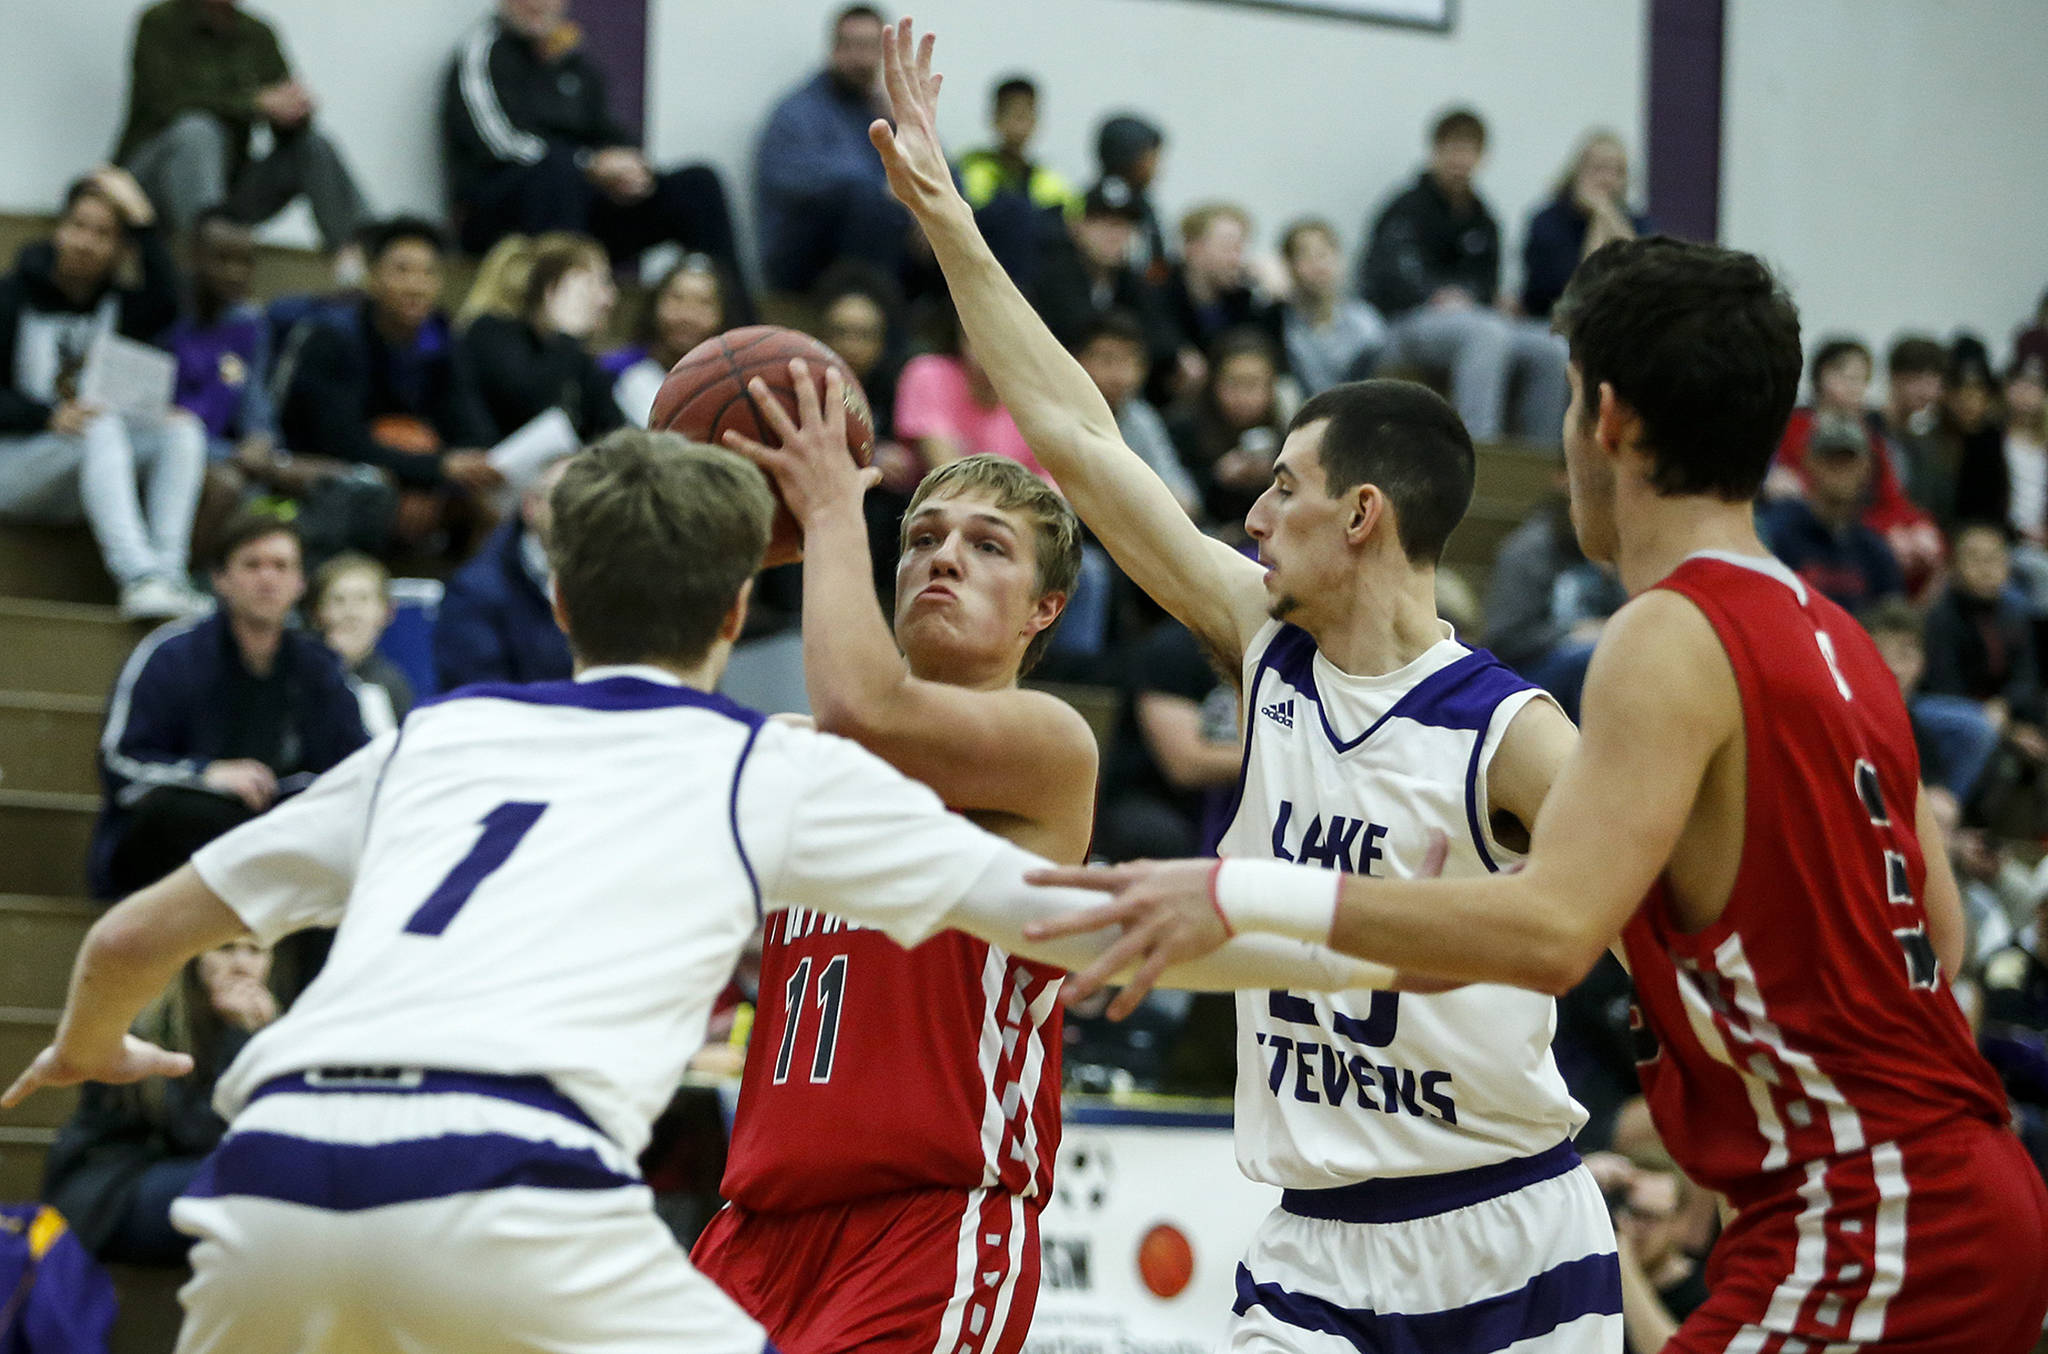 Stanwood’s Karl DeBoer (center) shoots as Lake Stevens’ Garrett Kraxberger (left) and Derik Myers (second from right) defend and Stanwood’s Matt Vail (far right) looks on during a game Dec. 5, 2017, at Lake Stevens High School. (Ian Terry / The Herald)